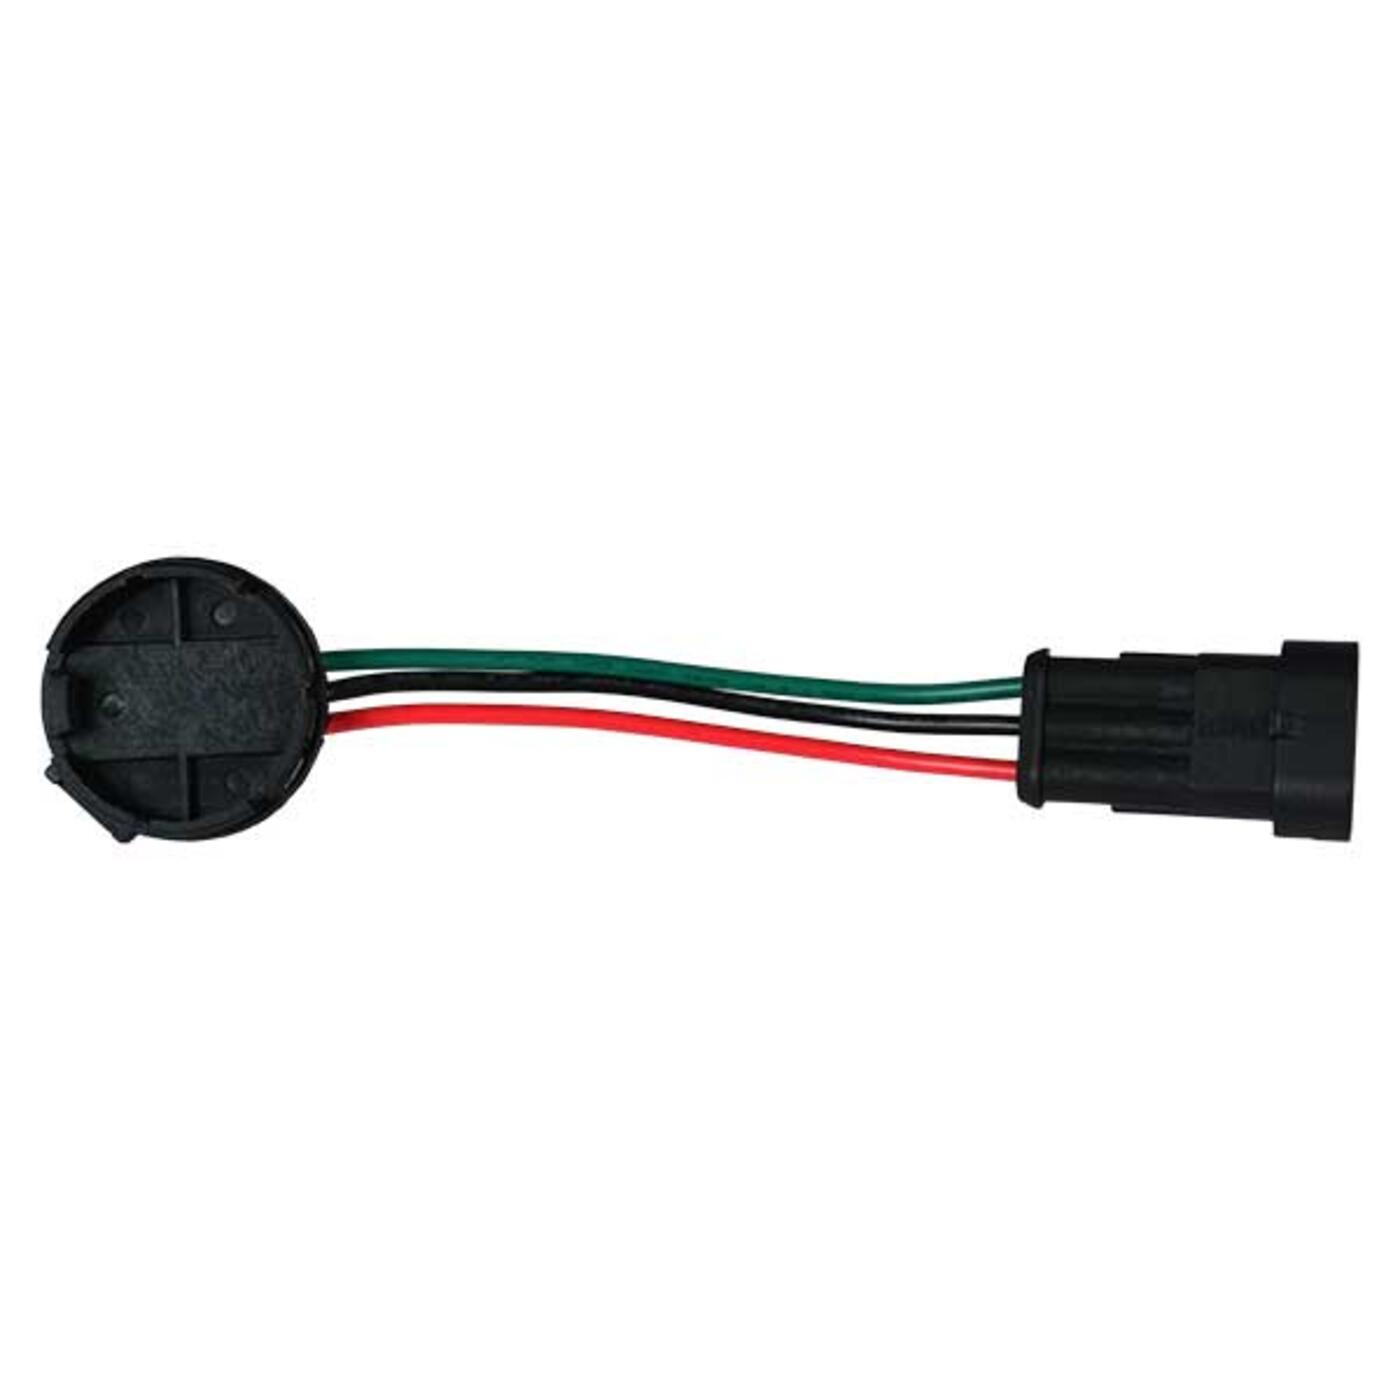 Speed Sensor for 12"8 controllers with flat cap 2MO230